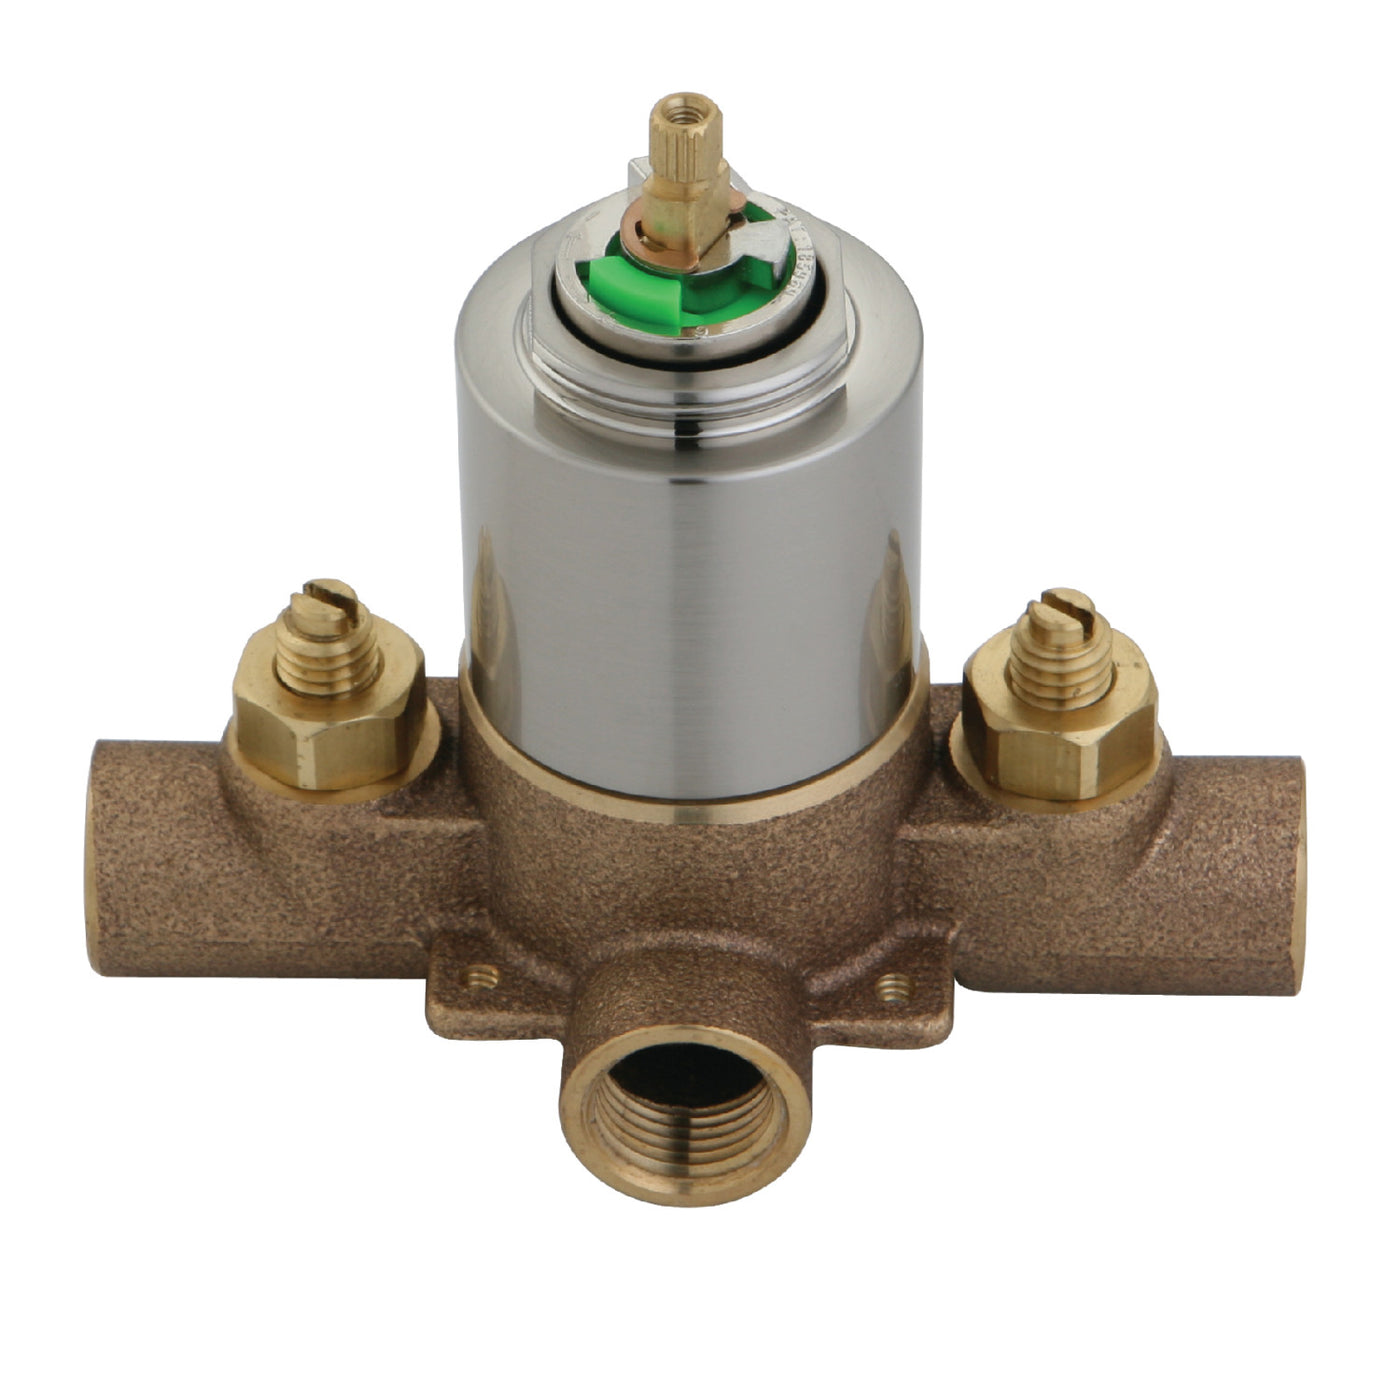 Elements of Design EB658V Pressure Balanced Rough-In Tub and Shower Valve with Stops, Brushed Nickel